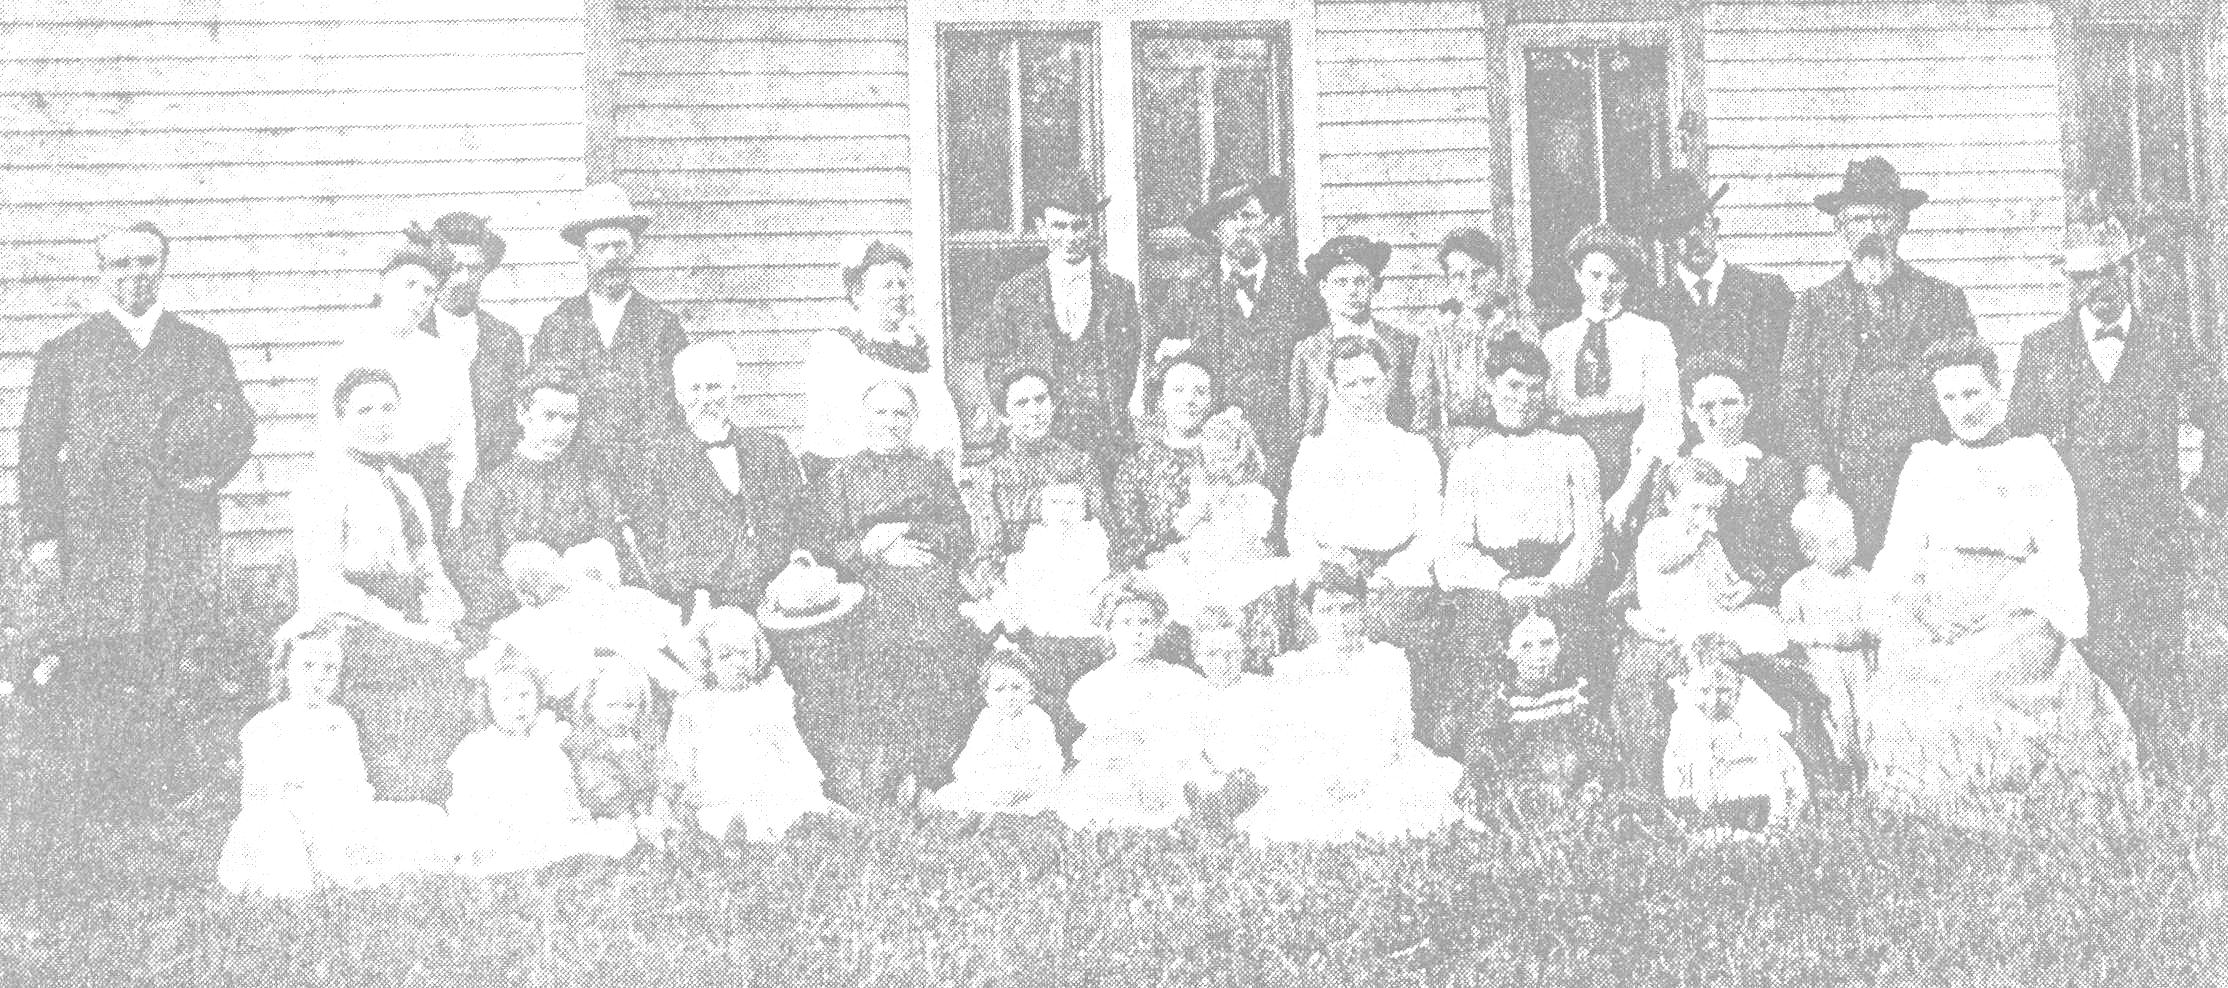 Sweet-Bookout family 1903